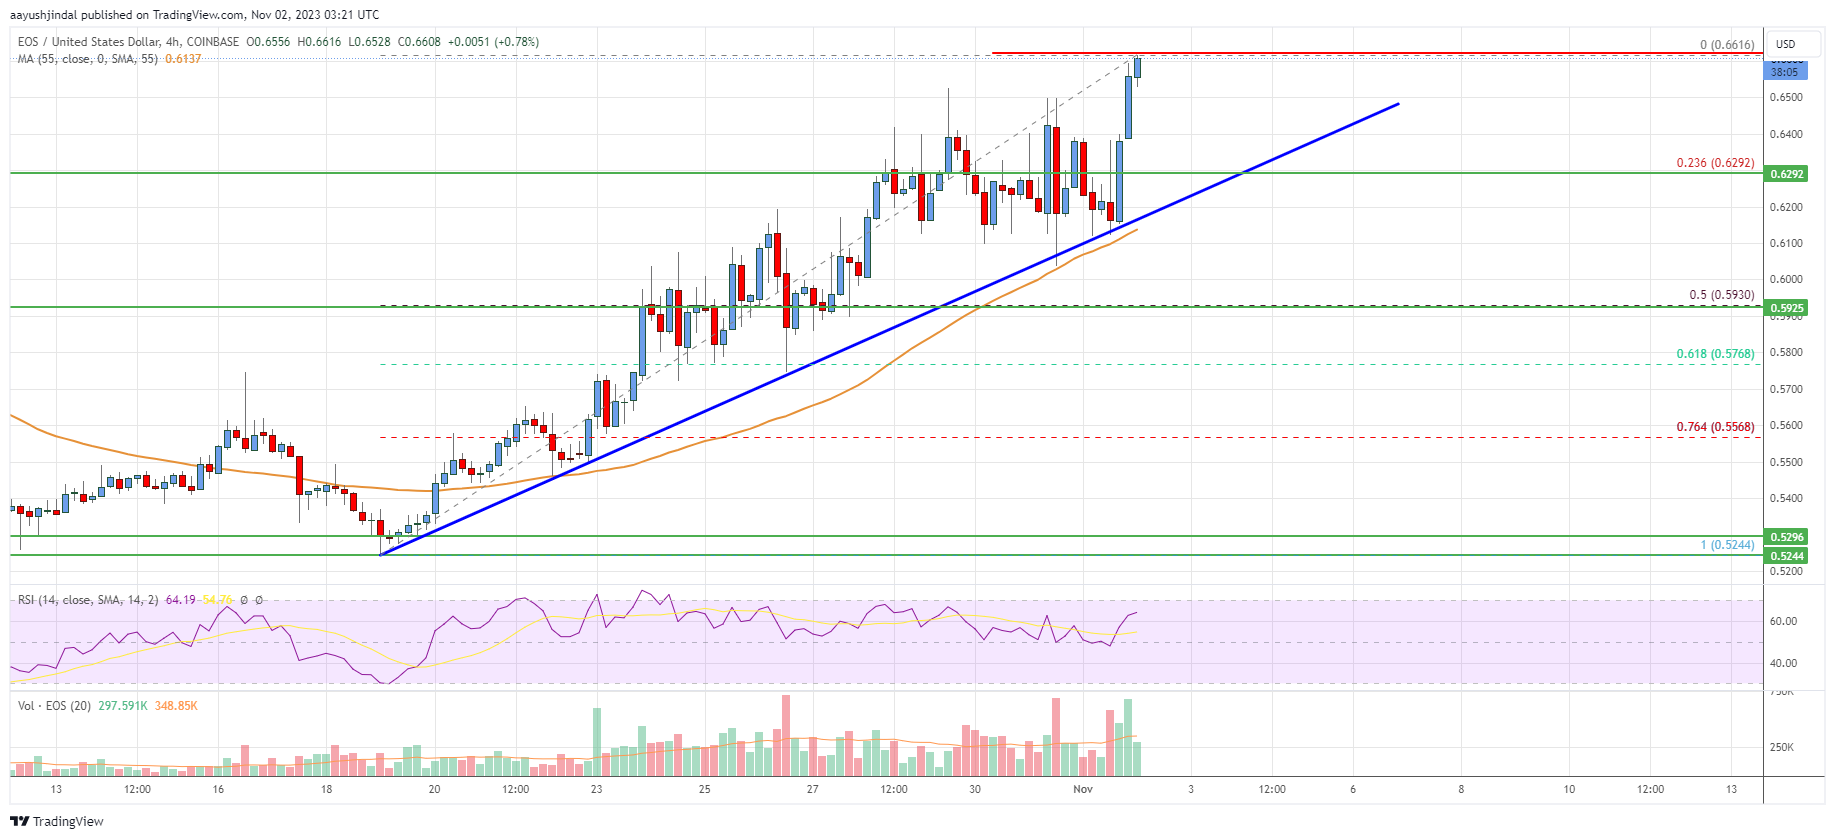 EOS Price Analysis: Bulls In Control, Aim For $0.70